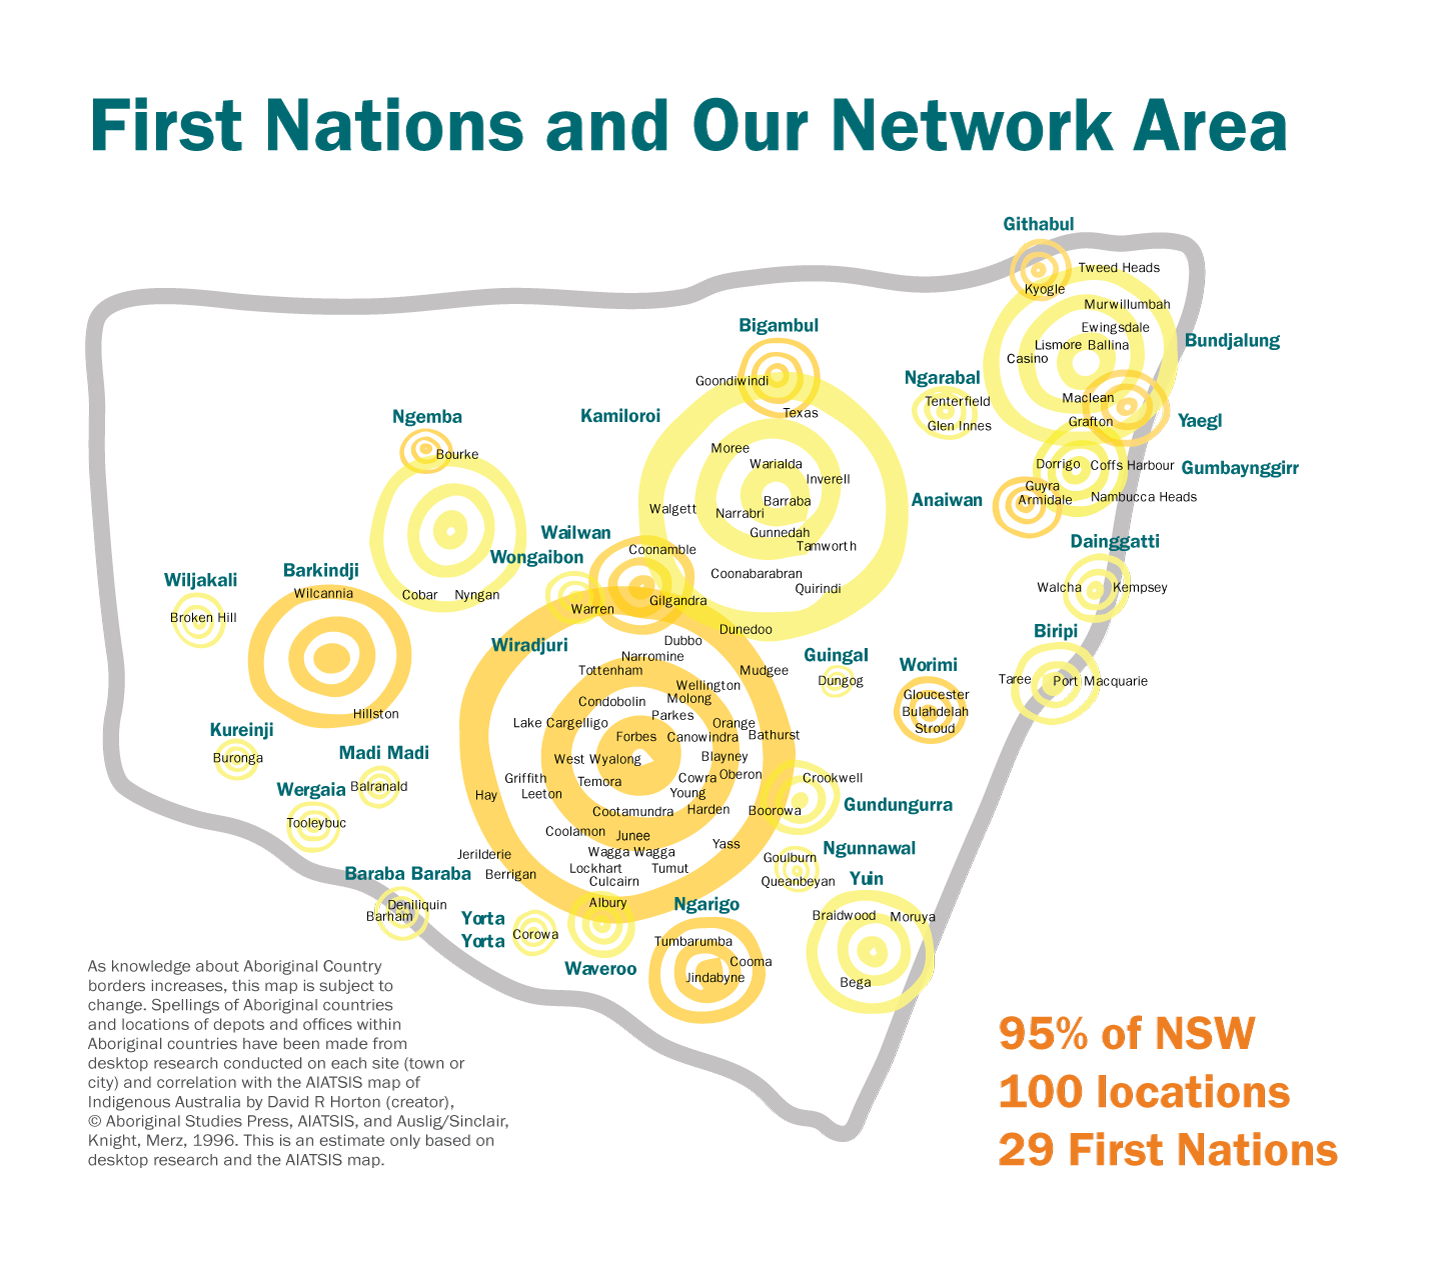 A map of our network area across 29 First Nations